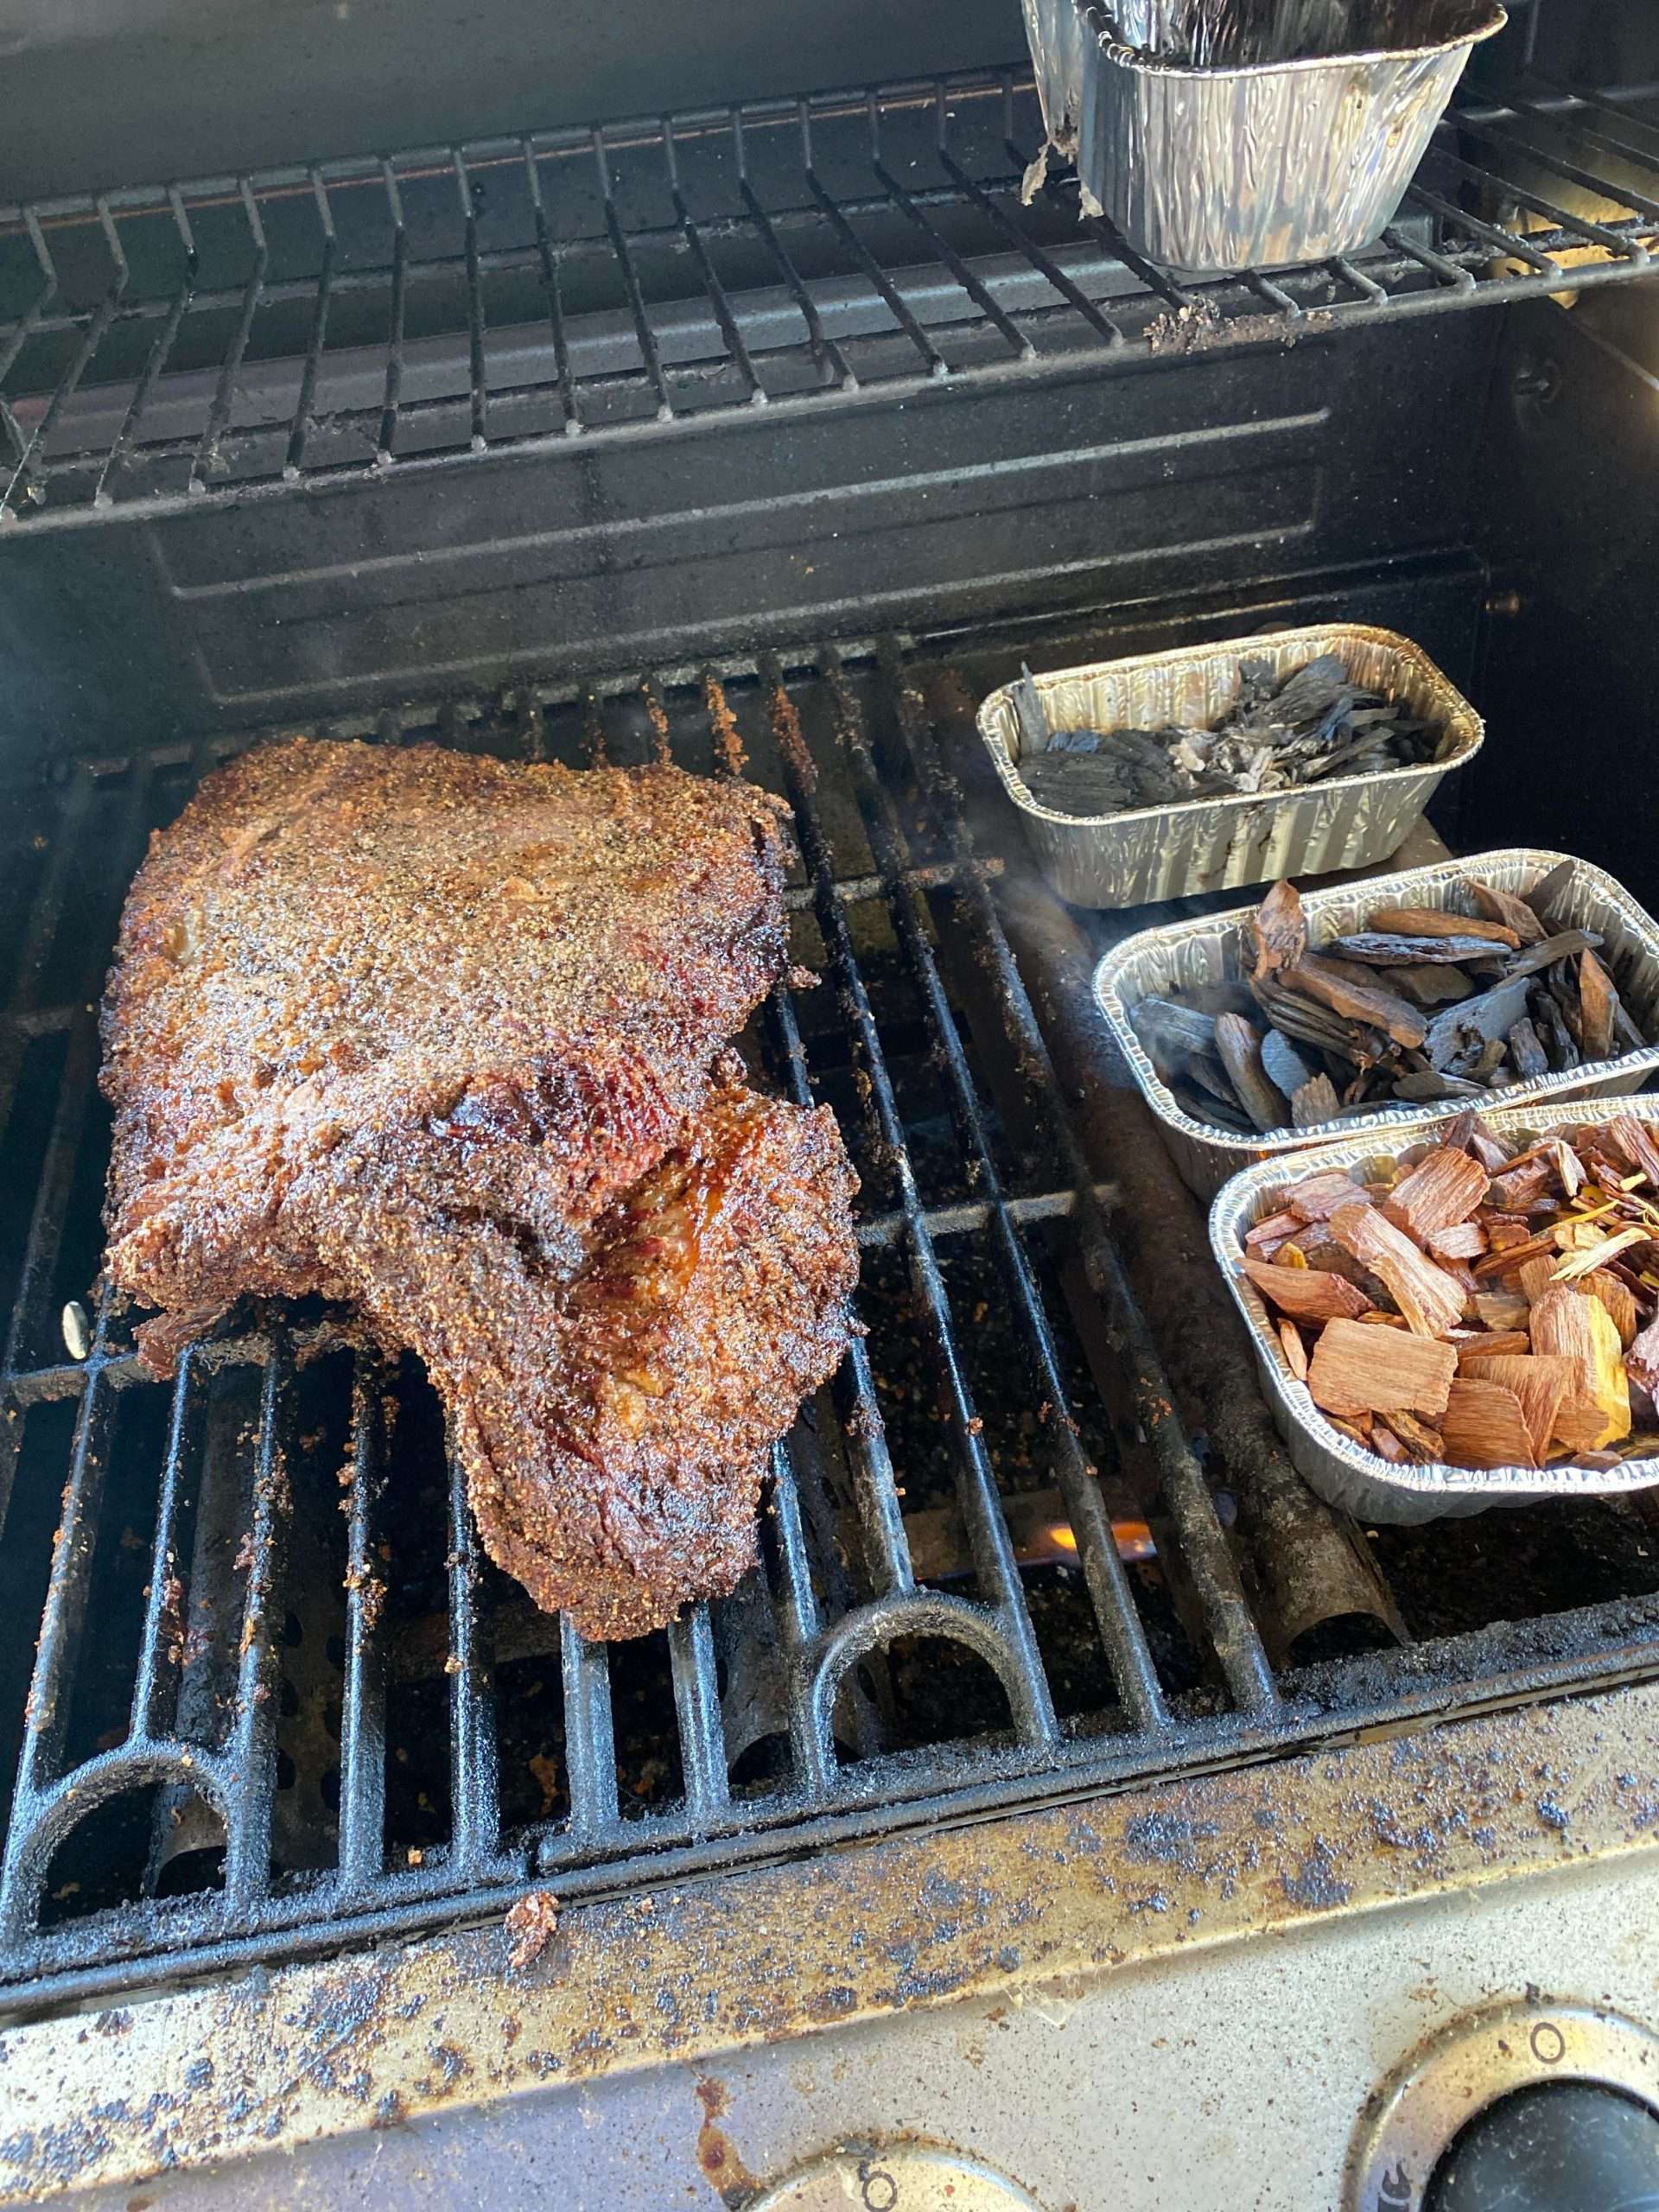 Smoking a brisket on a gas grill. About 6 hours in. This ...